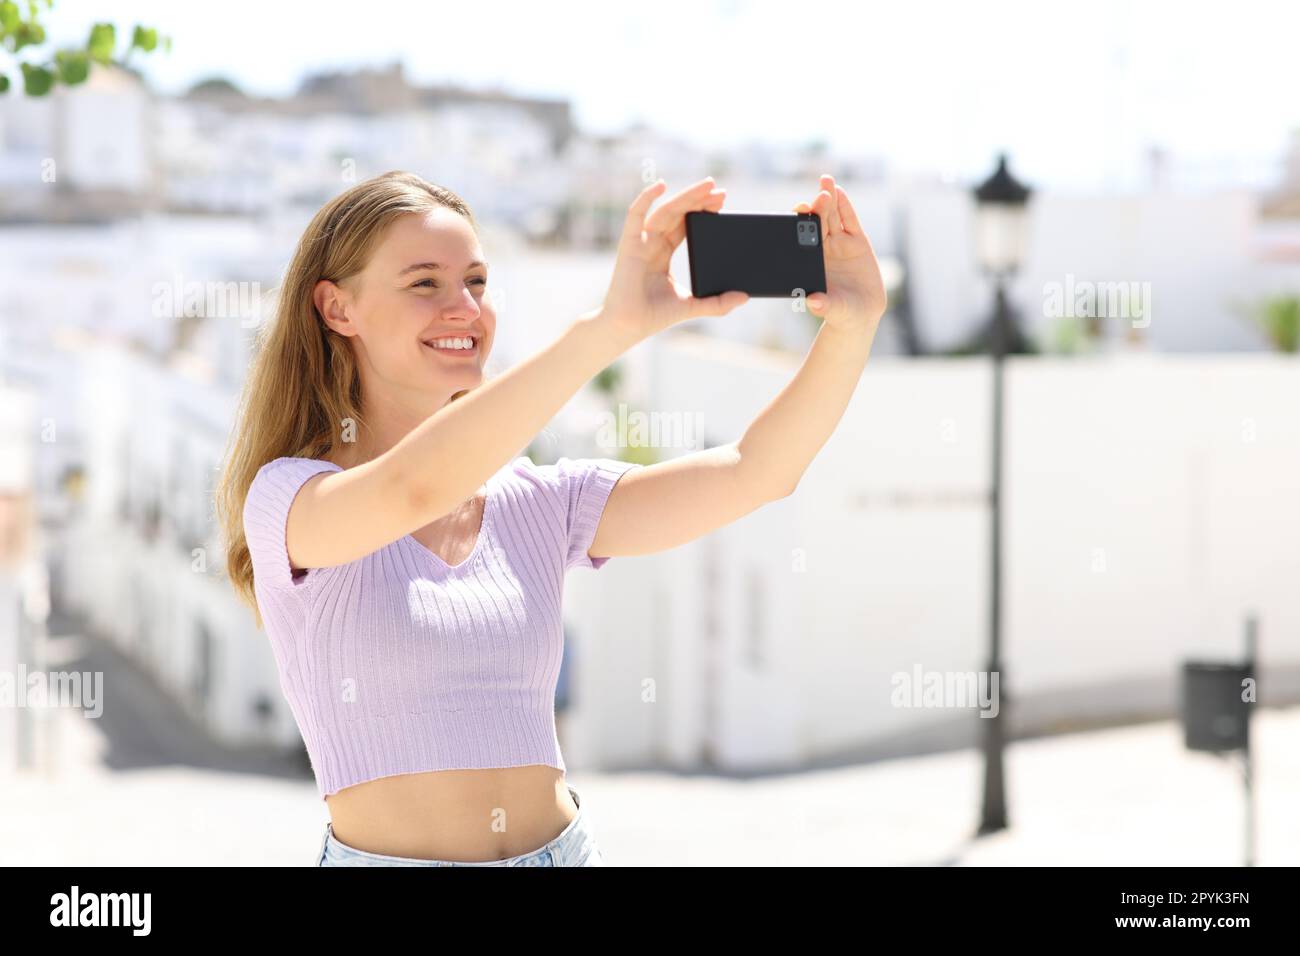 Teen taking slefie or photo in a town Stock Photo